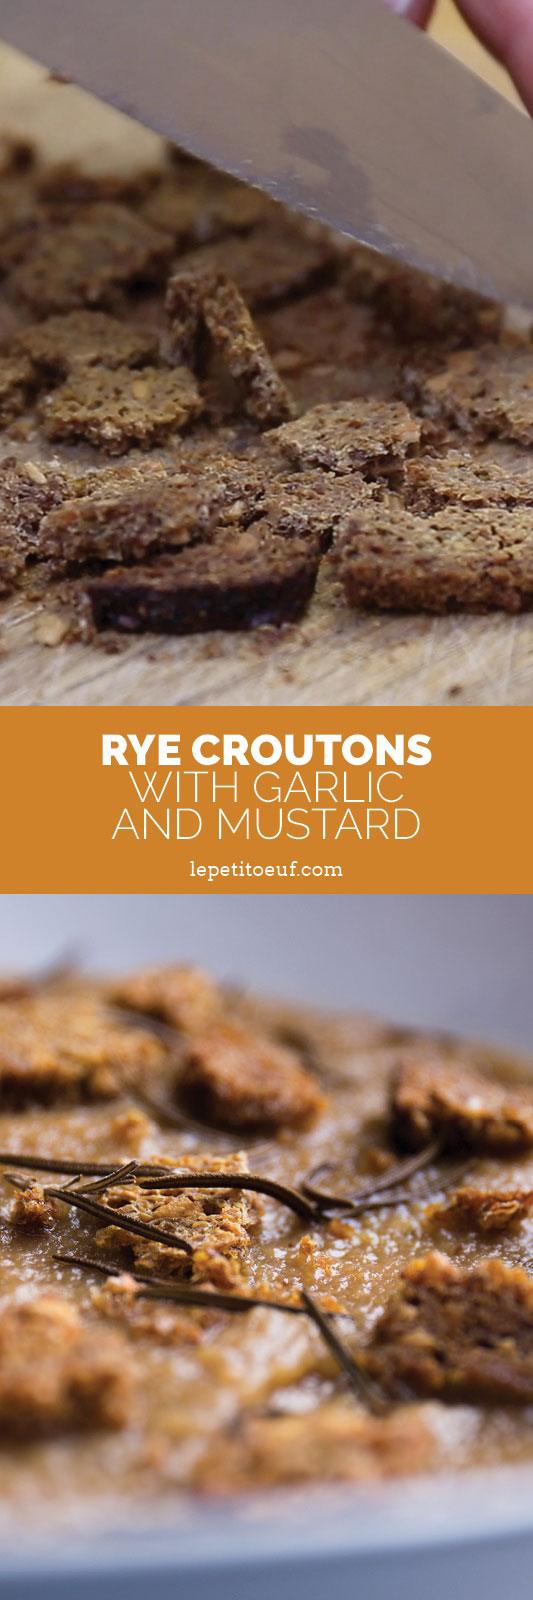 rye croutons with garlic and mustard